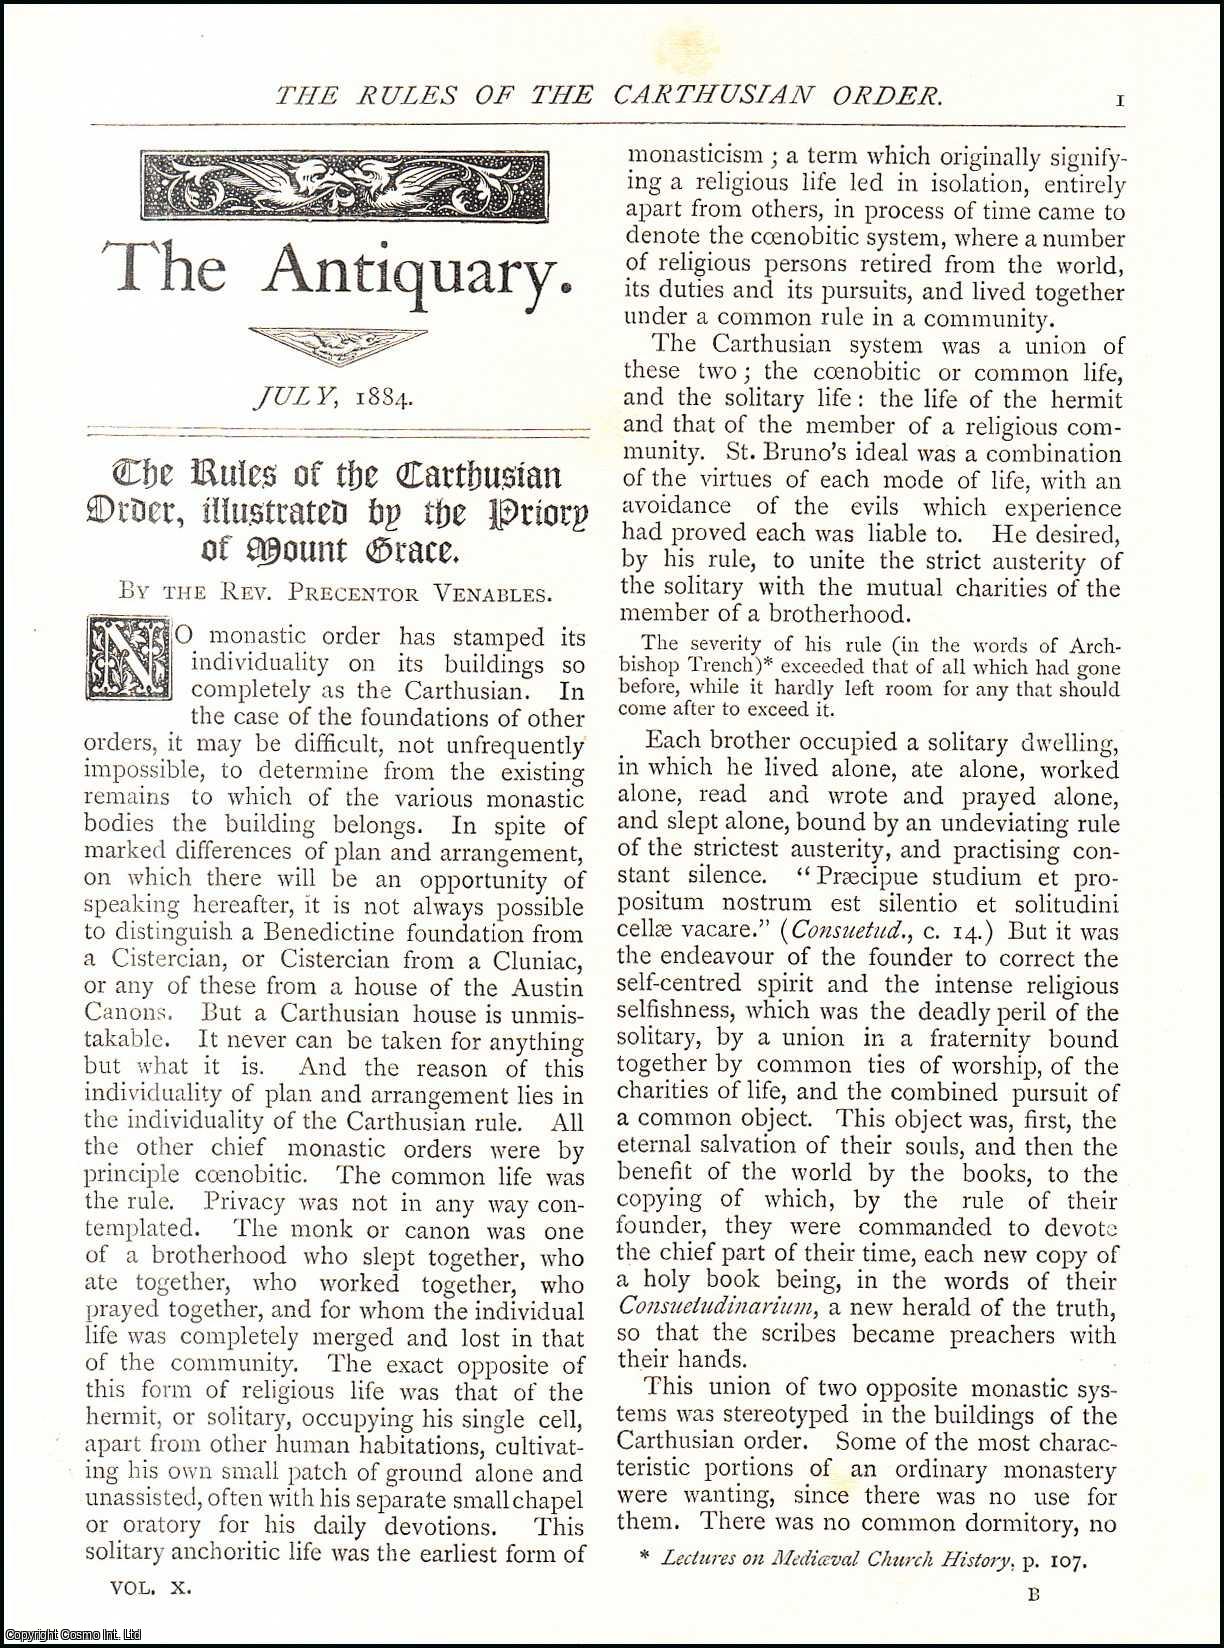 Rev. Precentor Venables - The Rules of The Carthusian Order, Illustrated by The Priory of Mount Grace. An original article from The Antiquary Magazine, 1884.